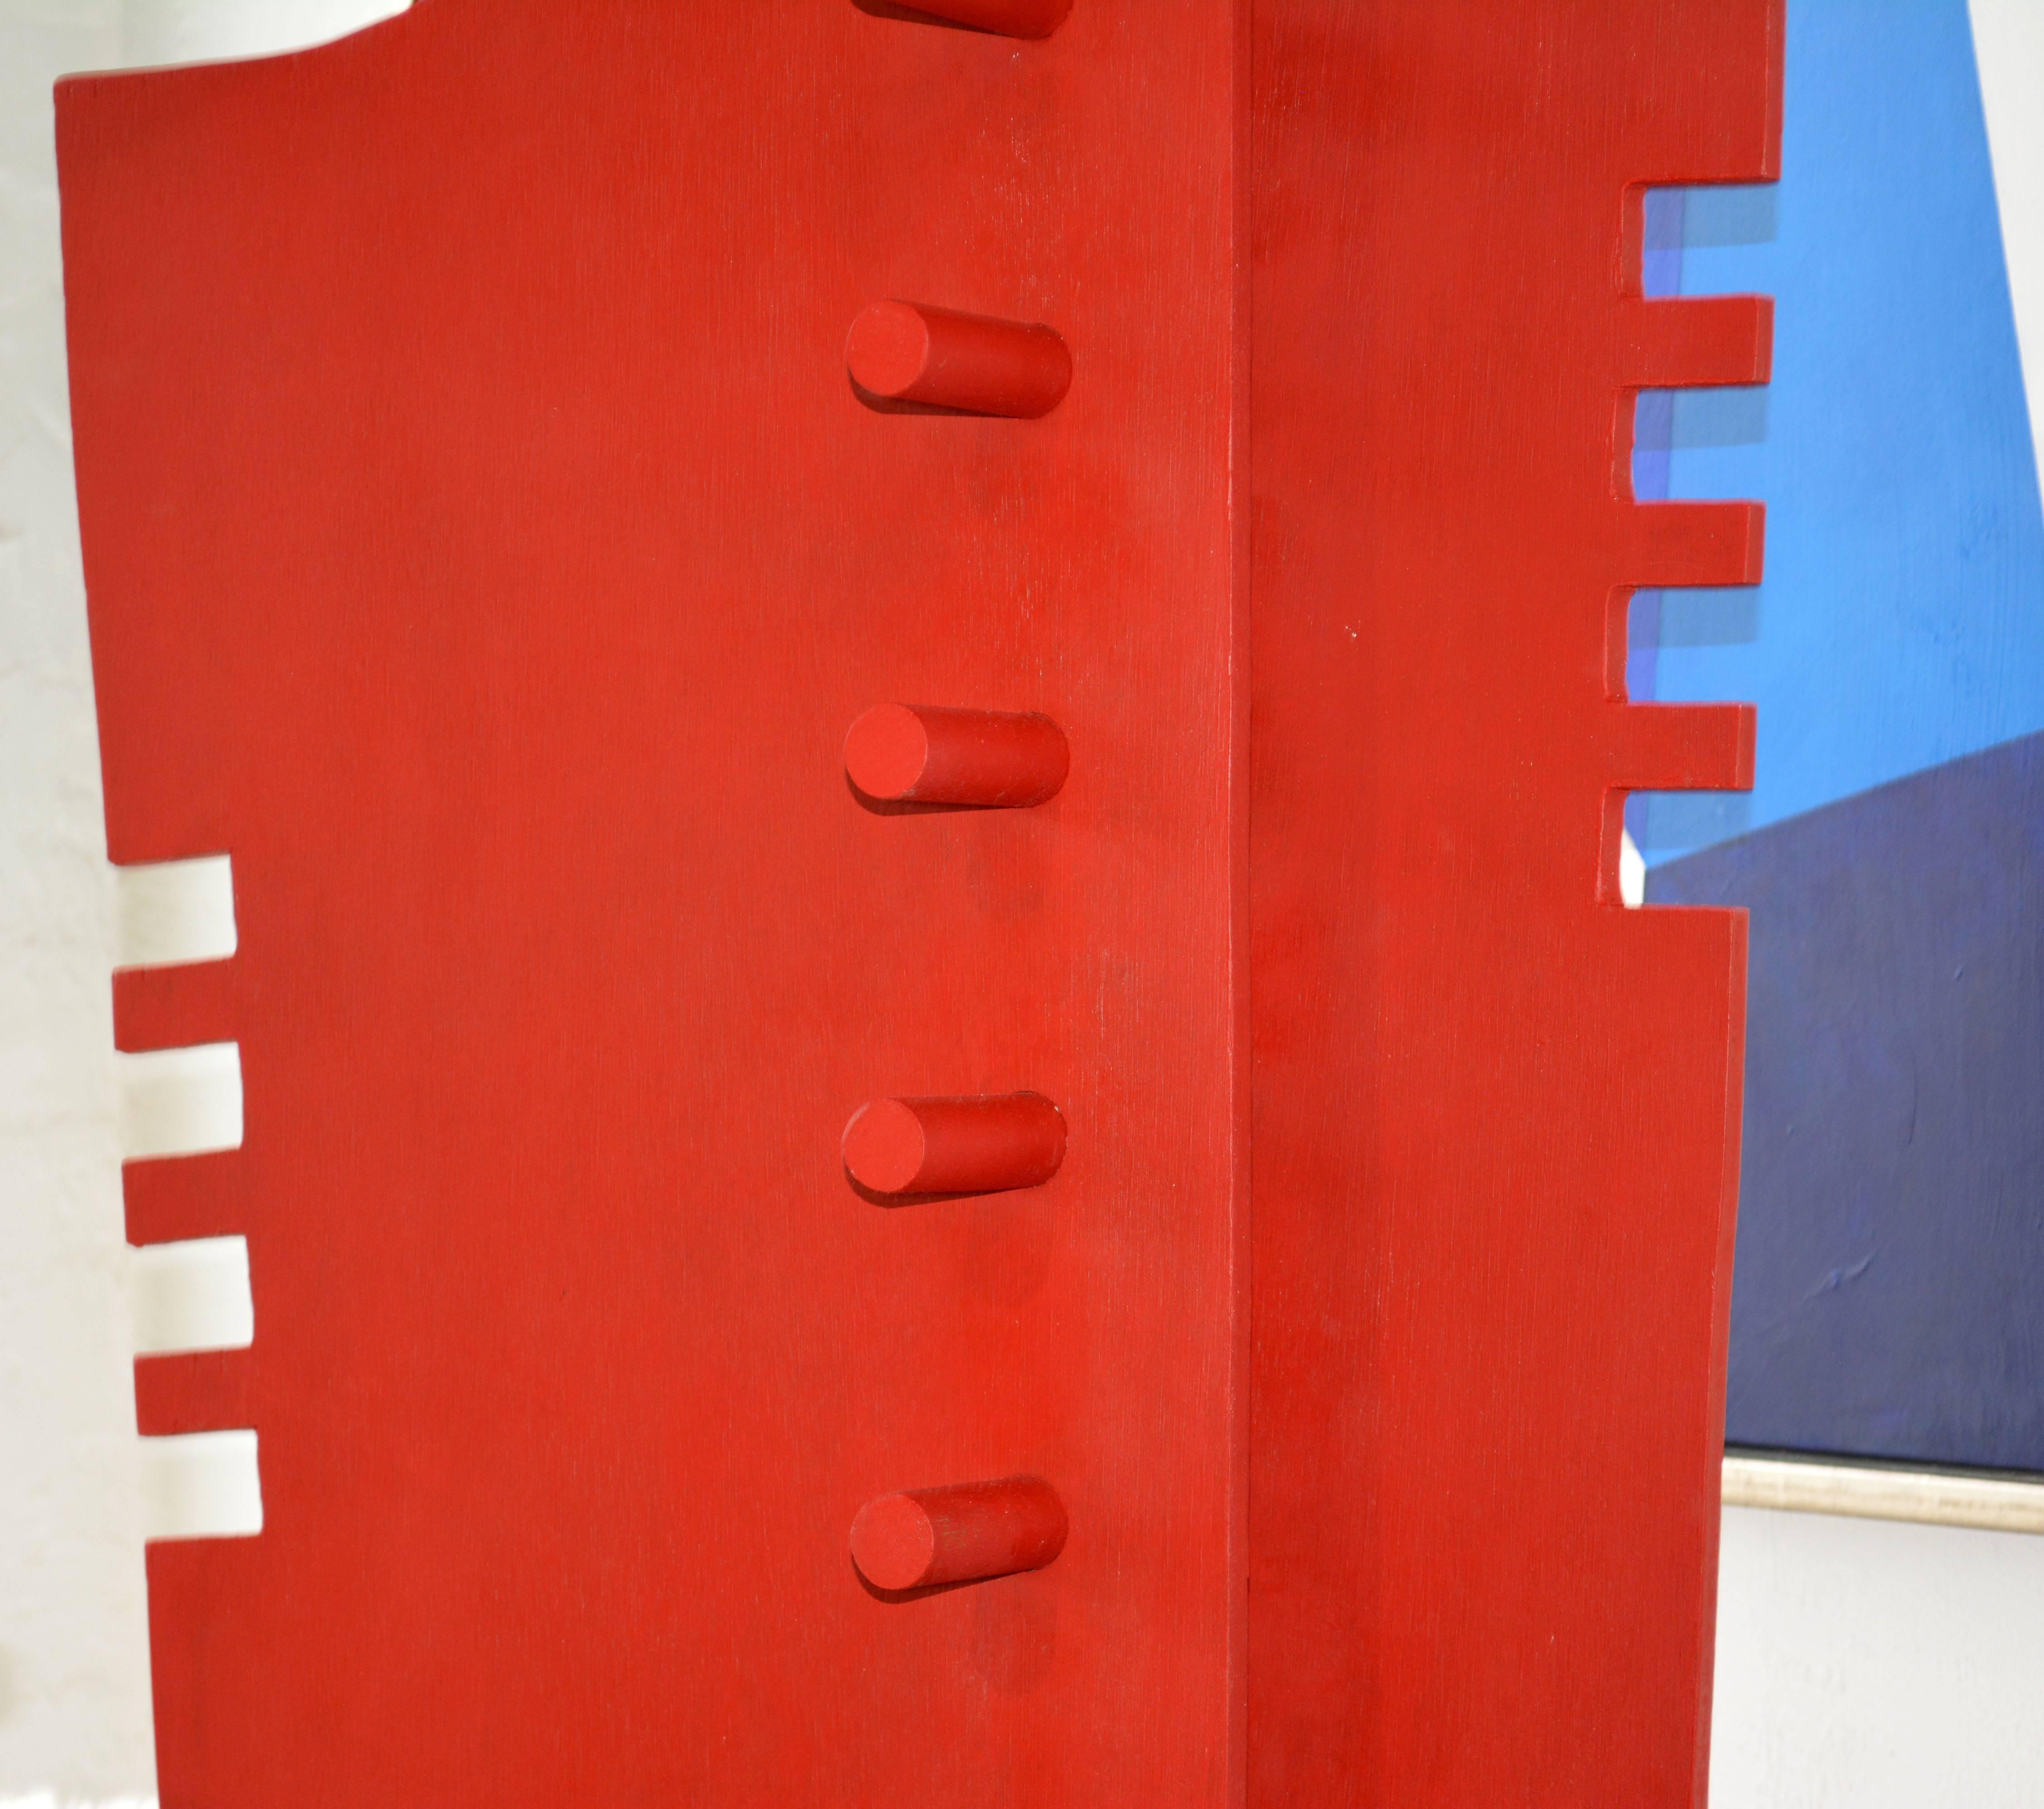 Painted Tall Abstract Red Wood Sculpture by Edward Toledano, British, 20th Century